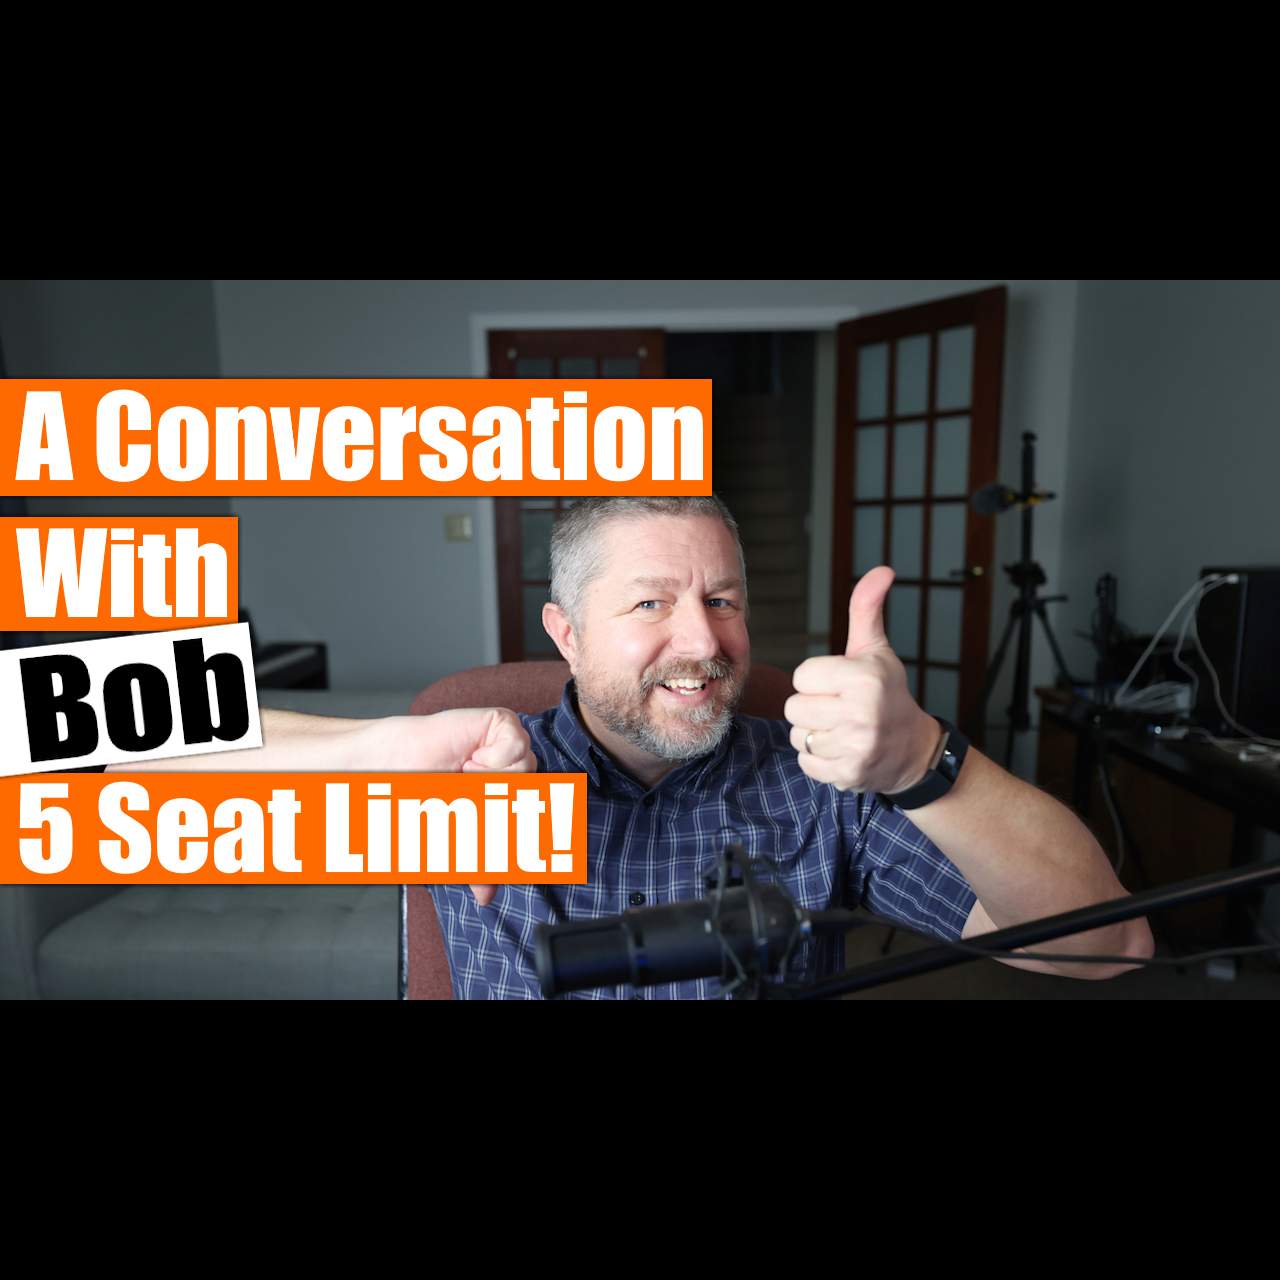 A Conversation with Bob - Tuesday August 22 - 7:00 PM Eastern Standard Time - 5 Person Limit